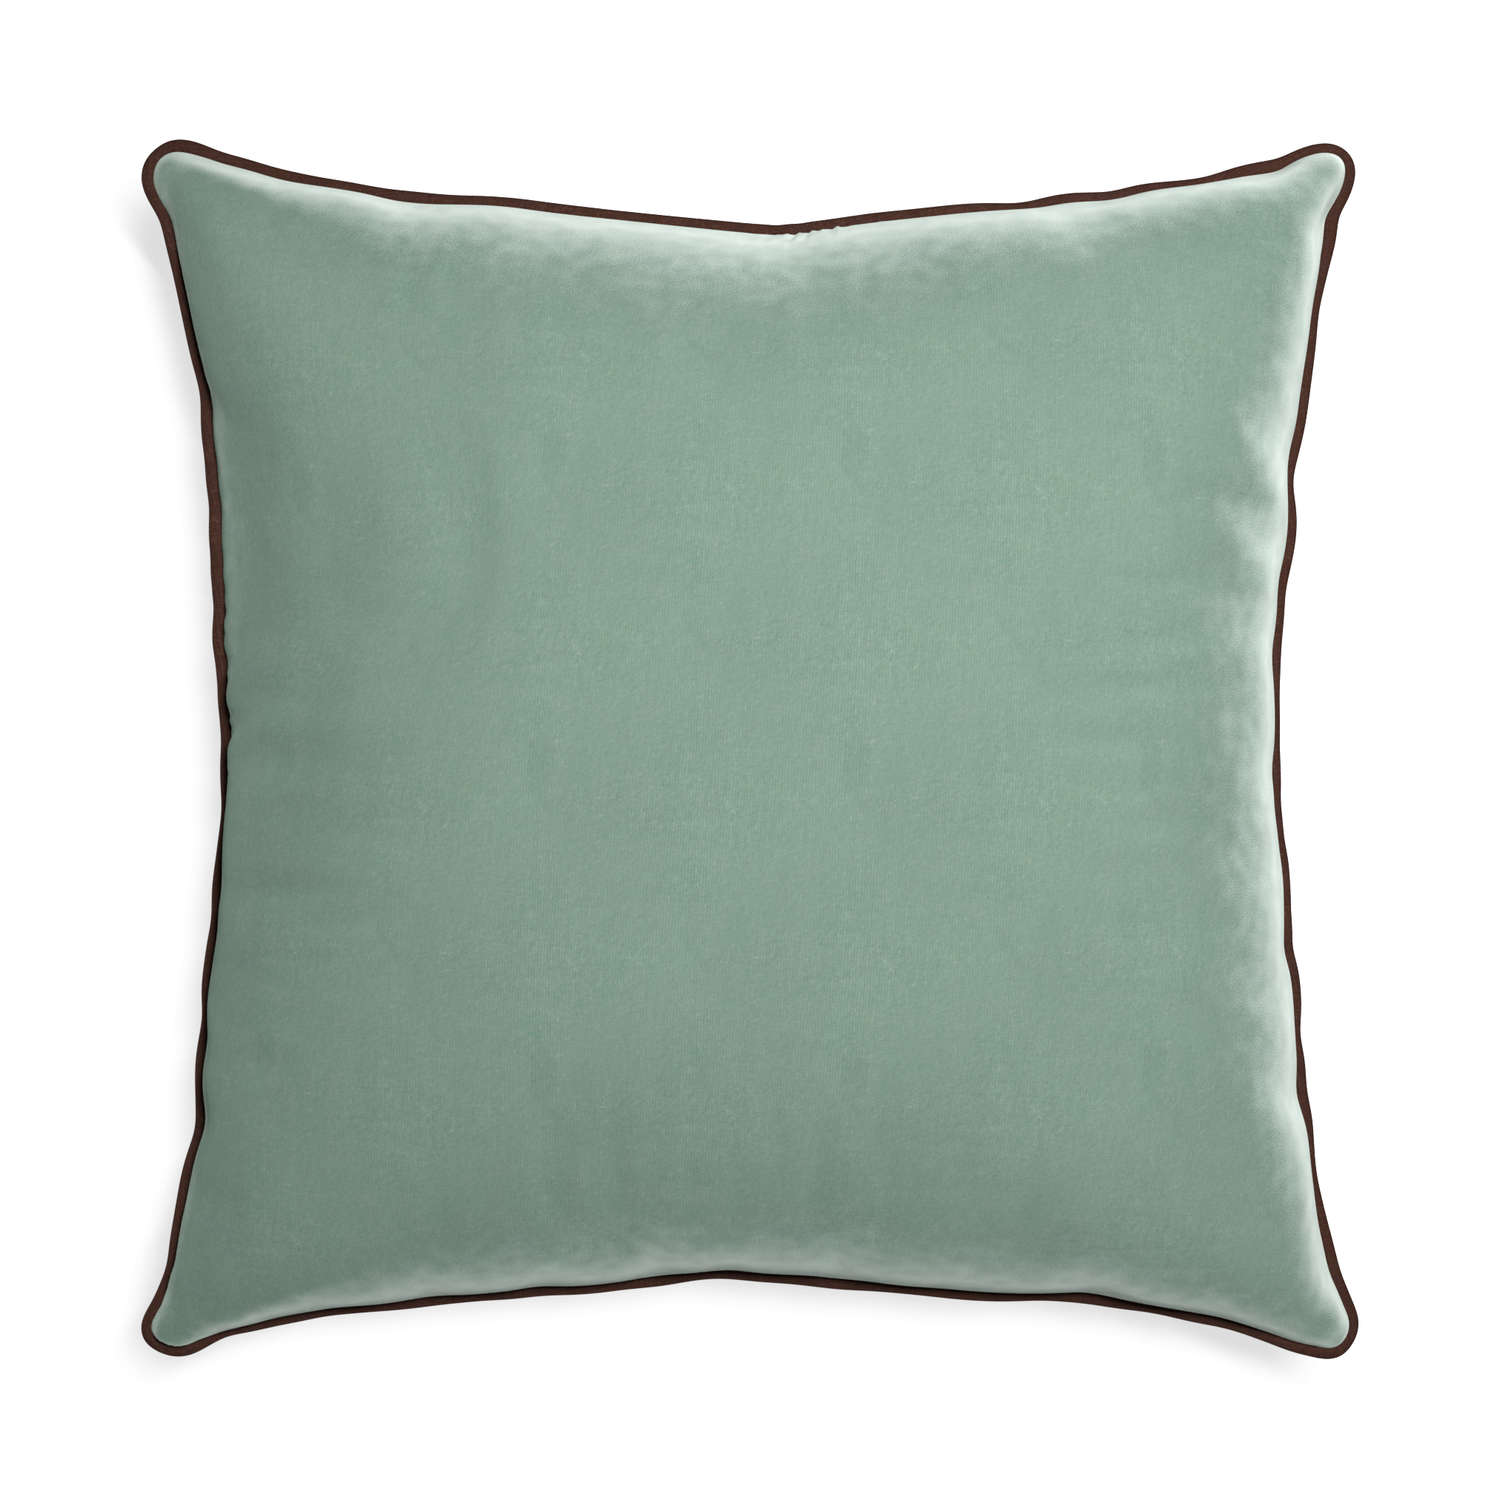 square blue green velvet pillow with brown piping